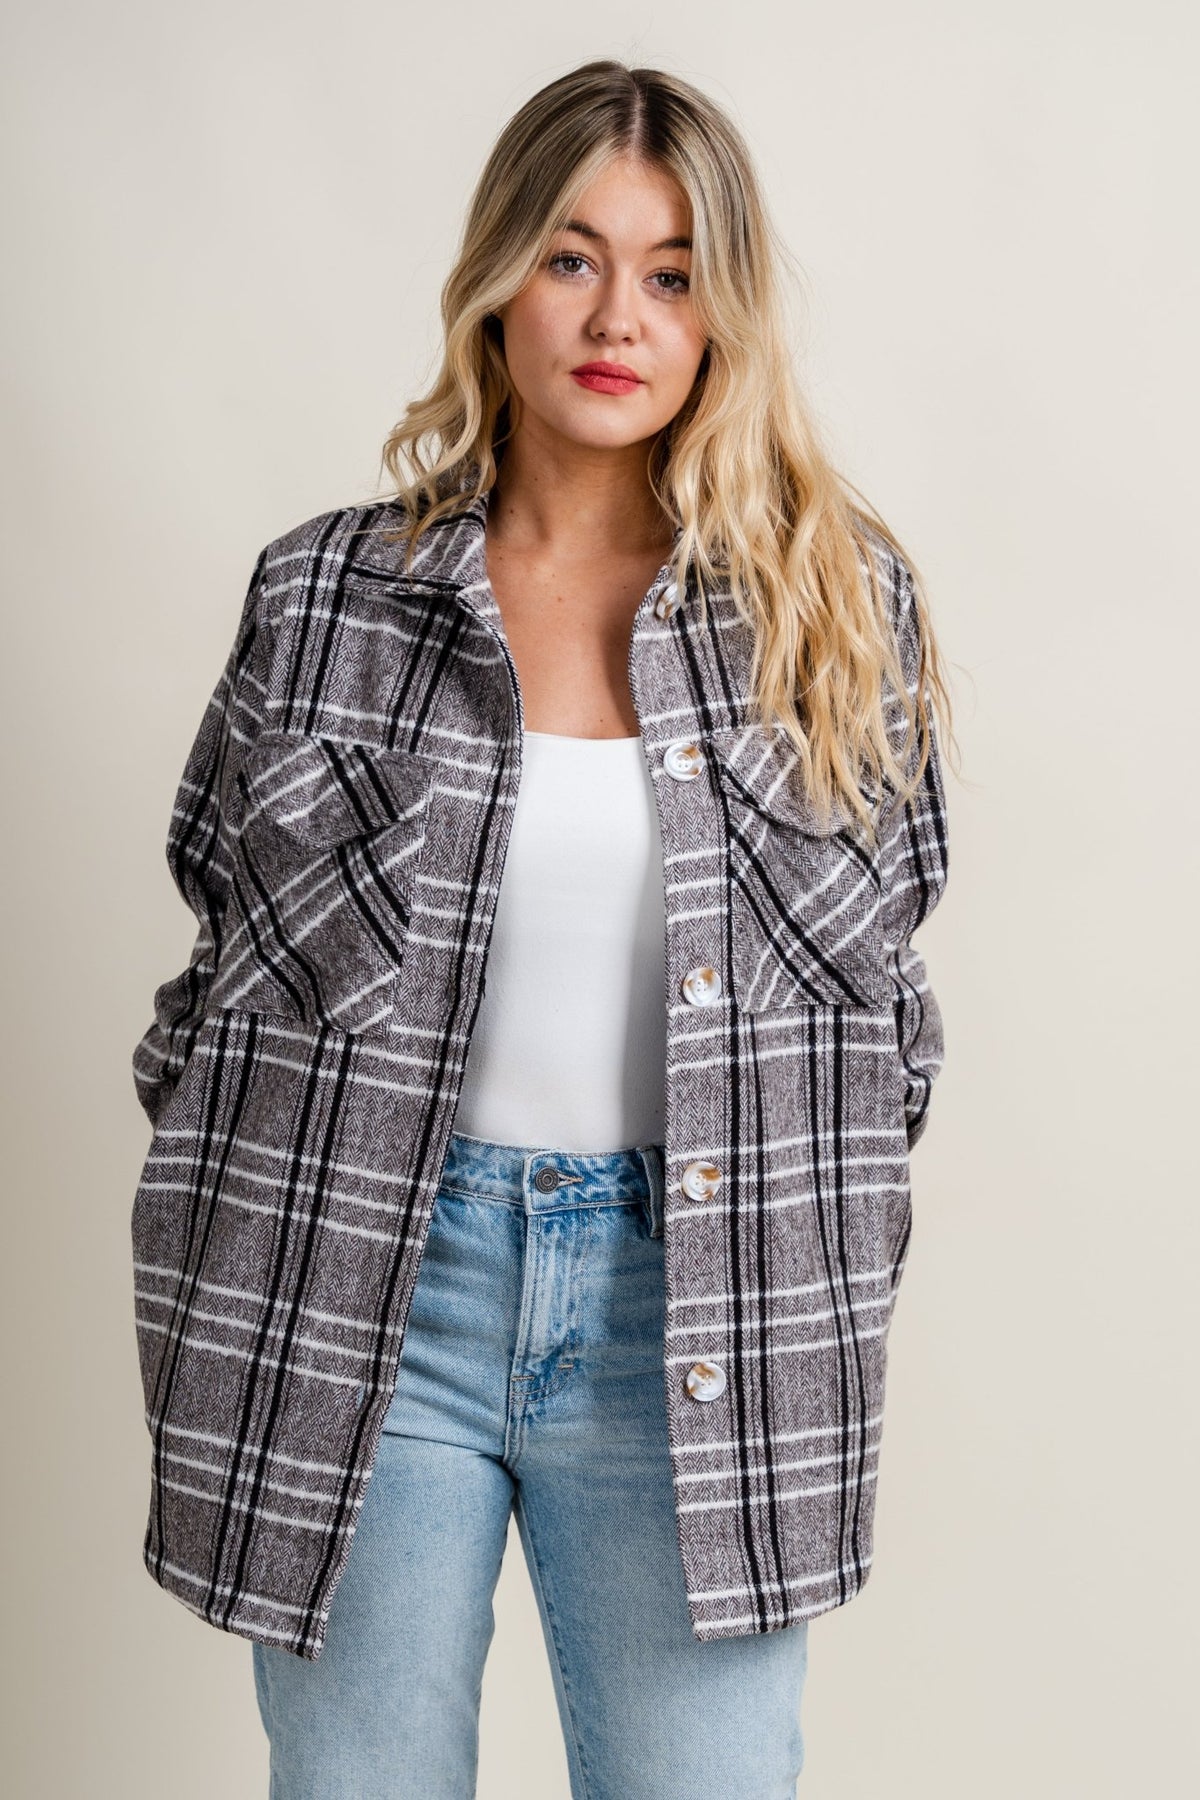 Plaid button down shacket heather grey - Cute Shacket - Trendy Jackets and Blazers at Lush Fashion Lounge Boutique in Oklahoma City